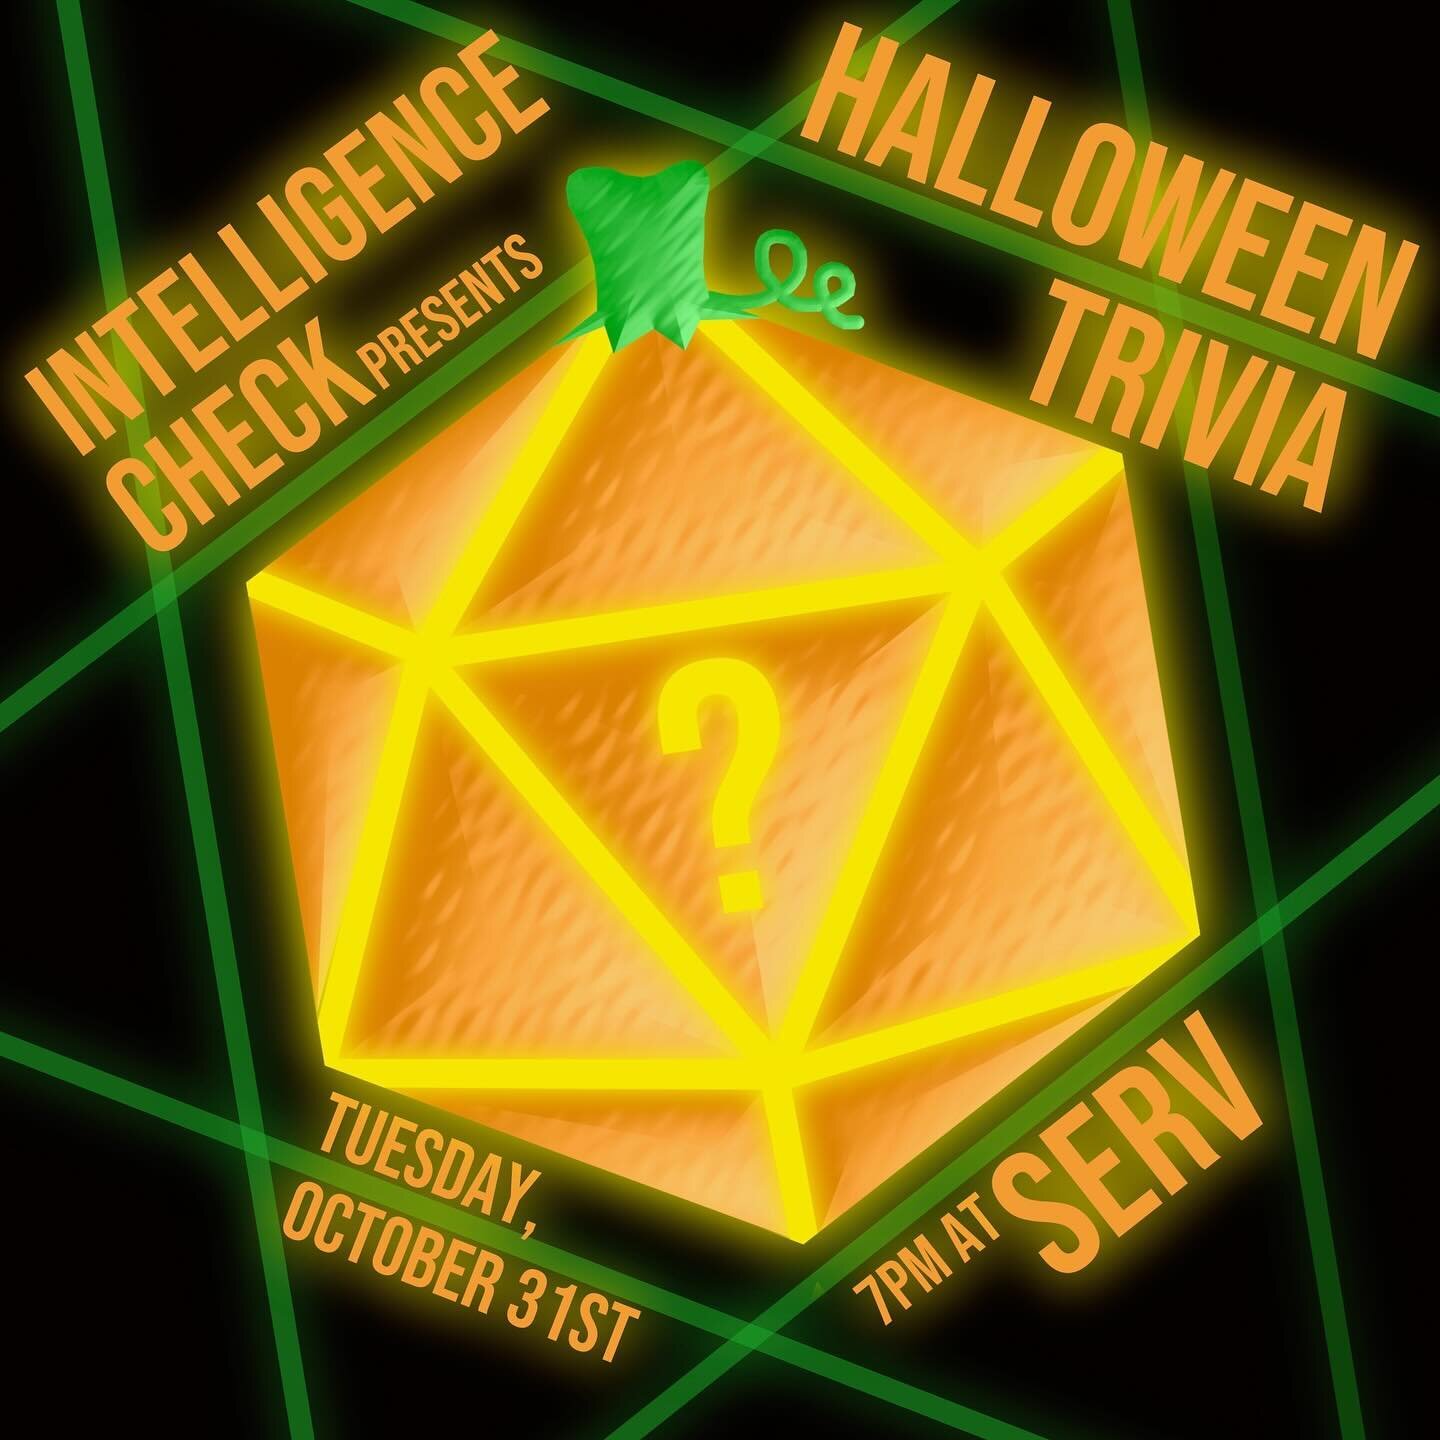 Join us on Halloween for a spookily spectacular night of trivia at @servfun! You don&rsquo;t want to miss out on the creepy-crawly questions and answers we&rsquo;ve got in store for you!